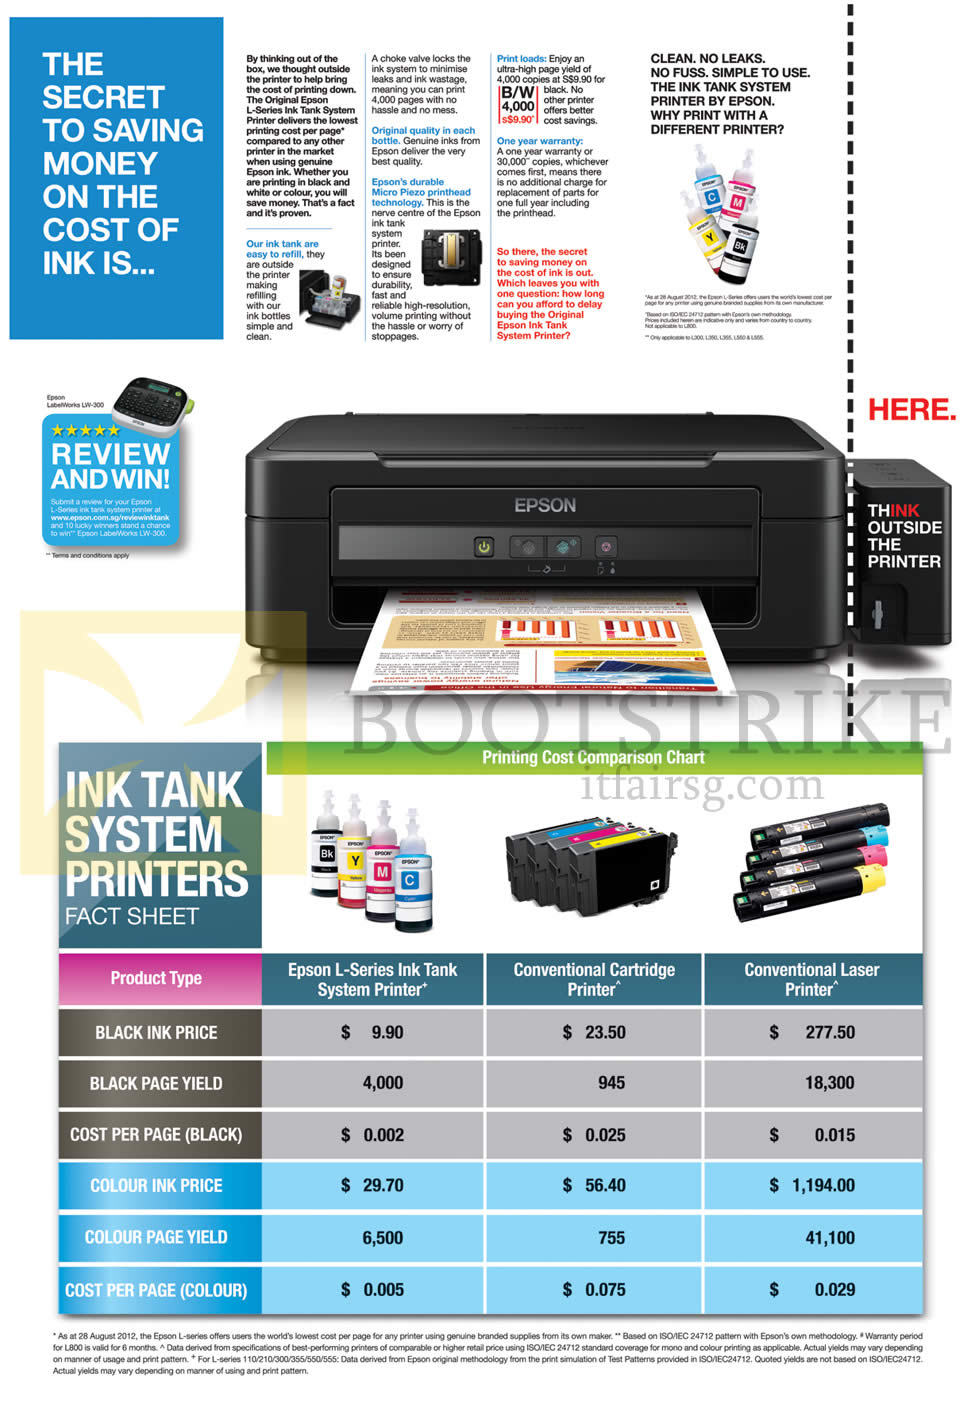 IT SHOW 2014 price list image brochure of Epson Printer Features, Ink Cartridge